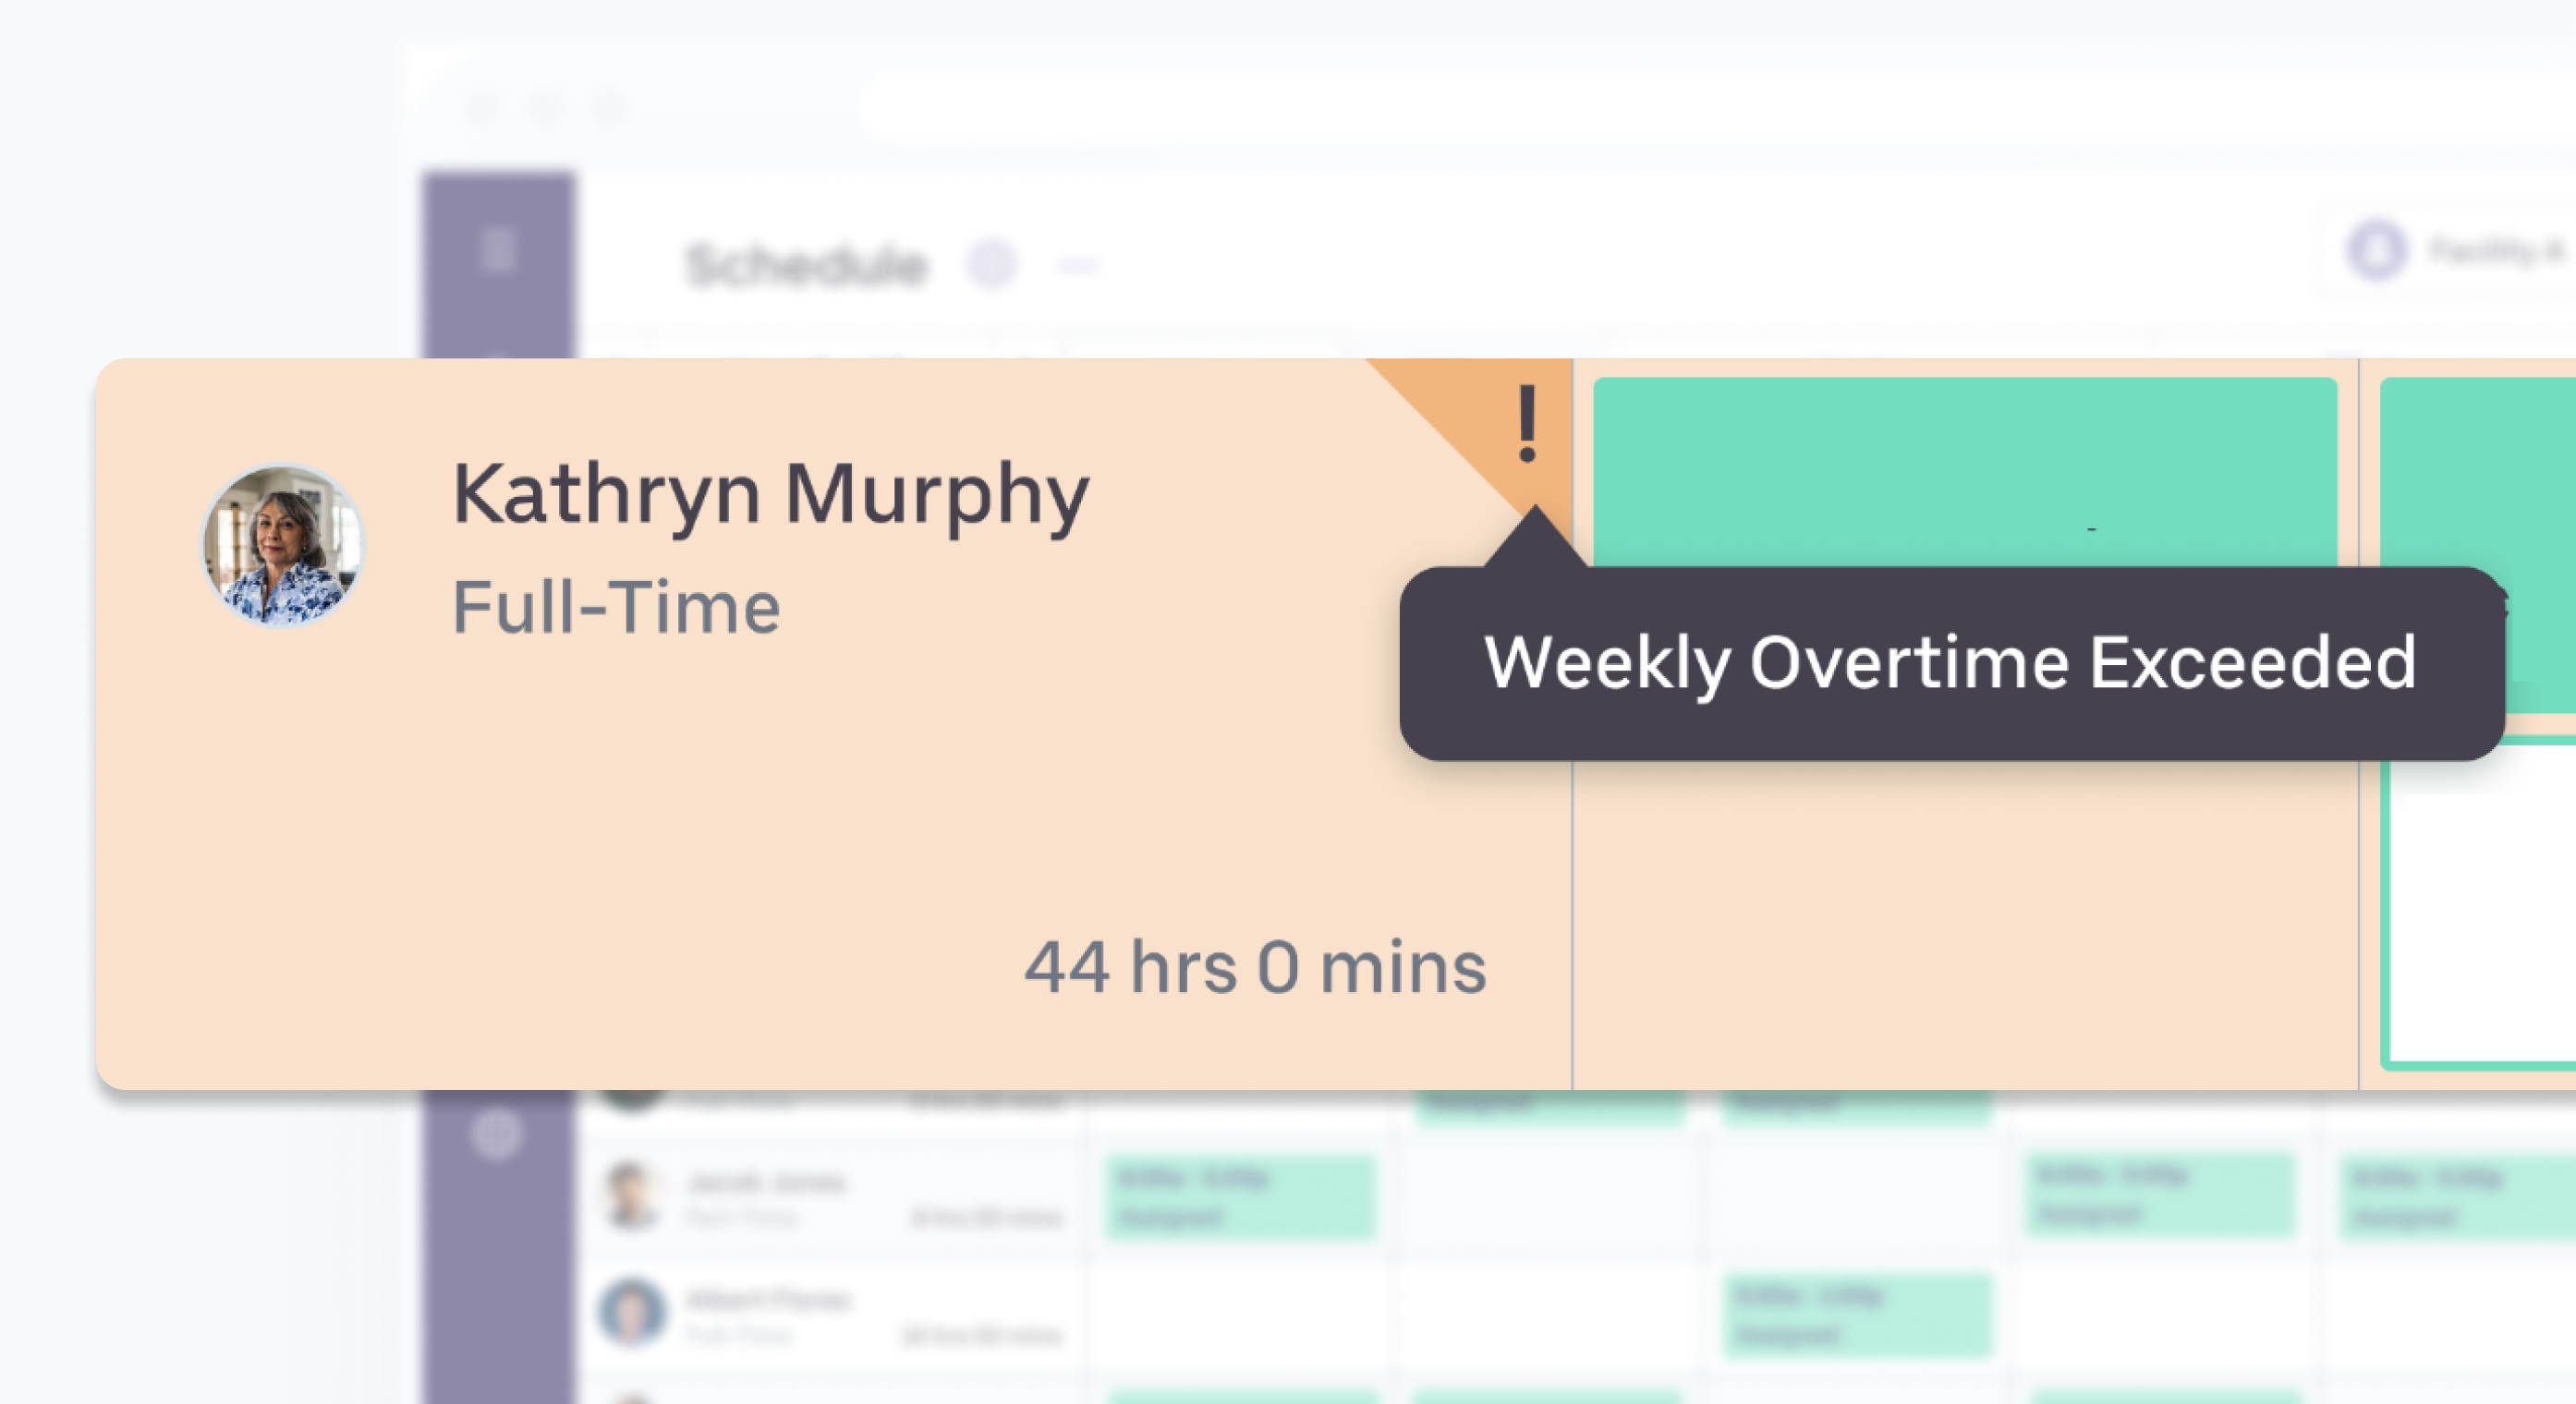 Healthcare Scheduling showcasing visibility into shifts